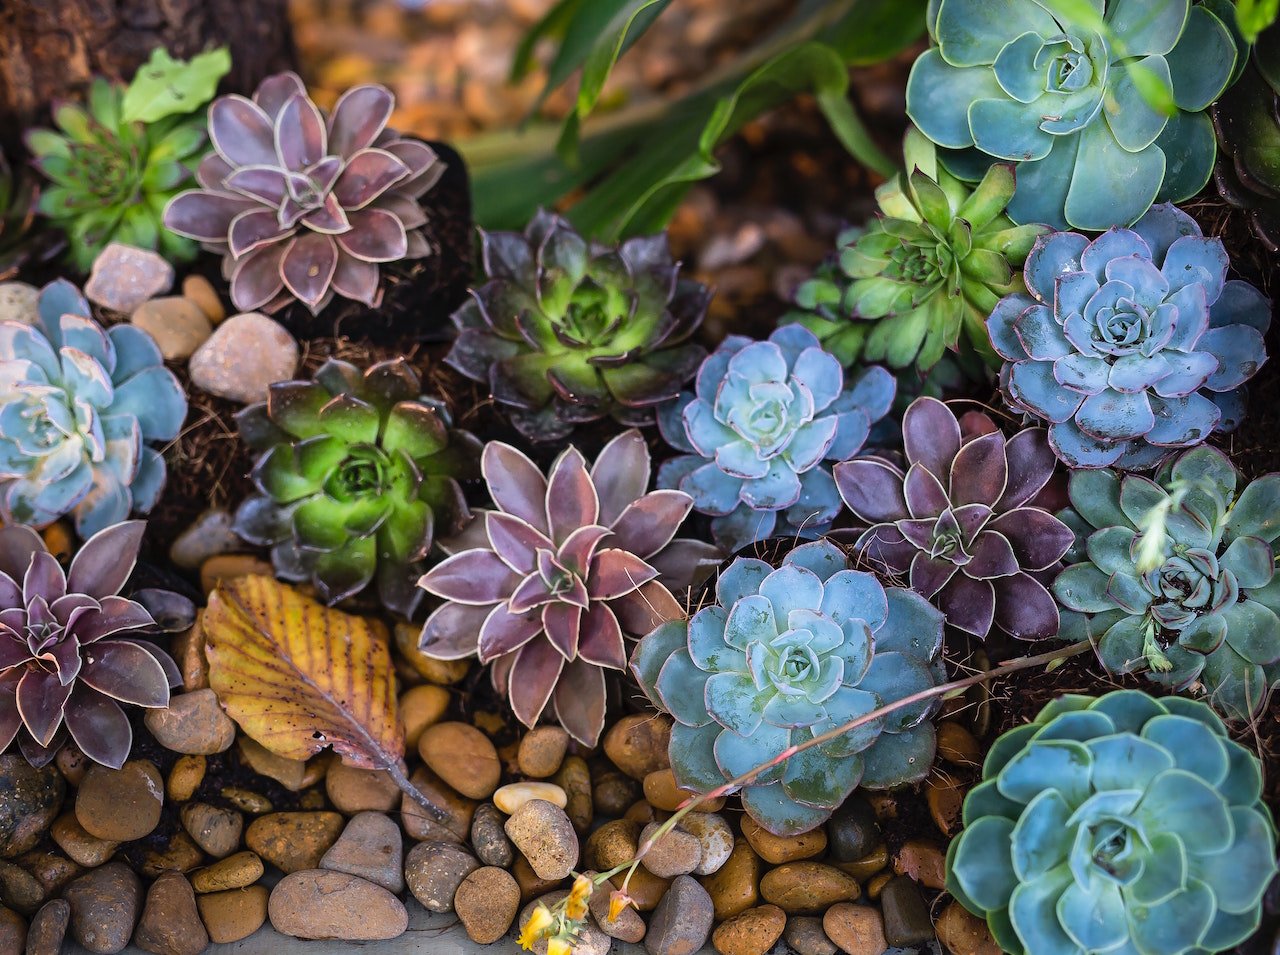 Assorted succulents of green and purple in a garden